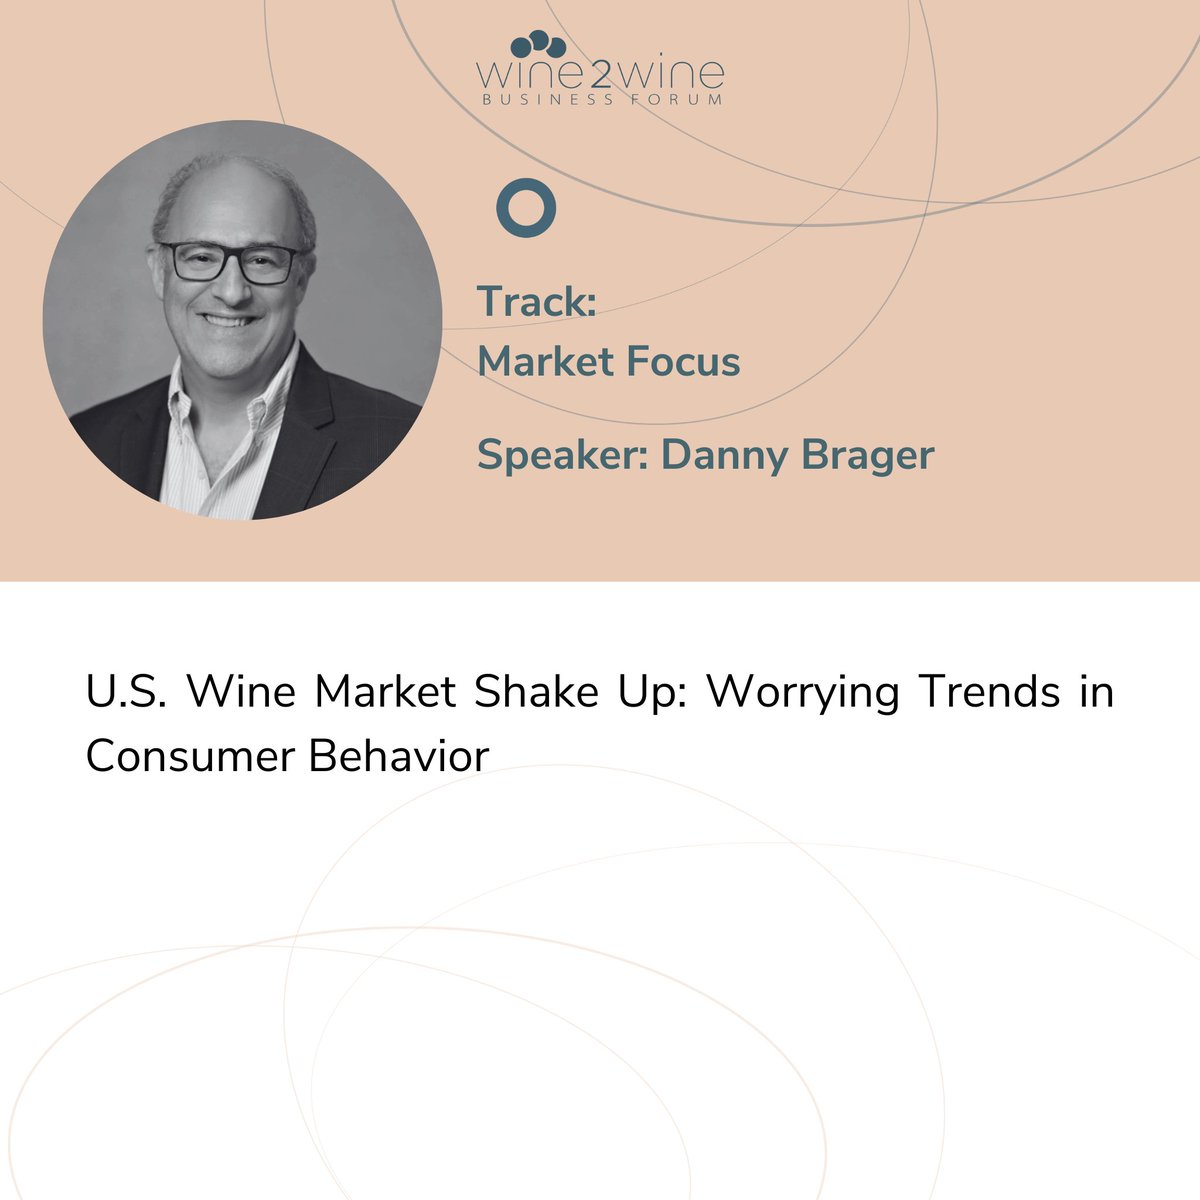 Leading industry analyst & WMC Research Committee member Danny Brager will present an in-depth analysis of the biggest trends currently shaping the 🇺🇸 retail wine market. What do you think these trends will be? You'll find out at #wine2wine 👀 #uswinemarket